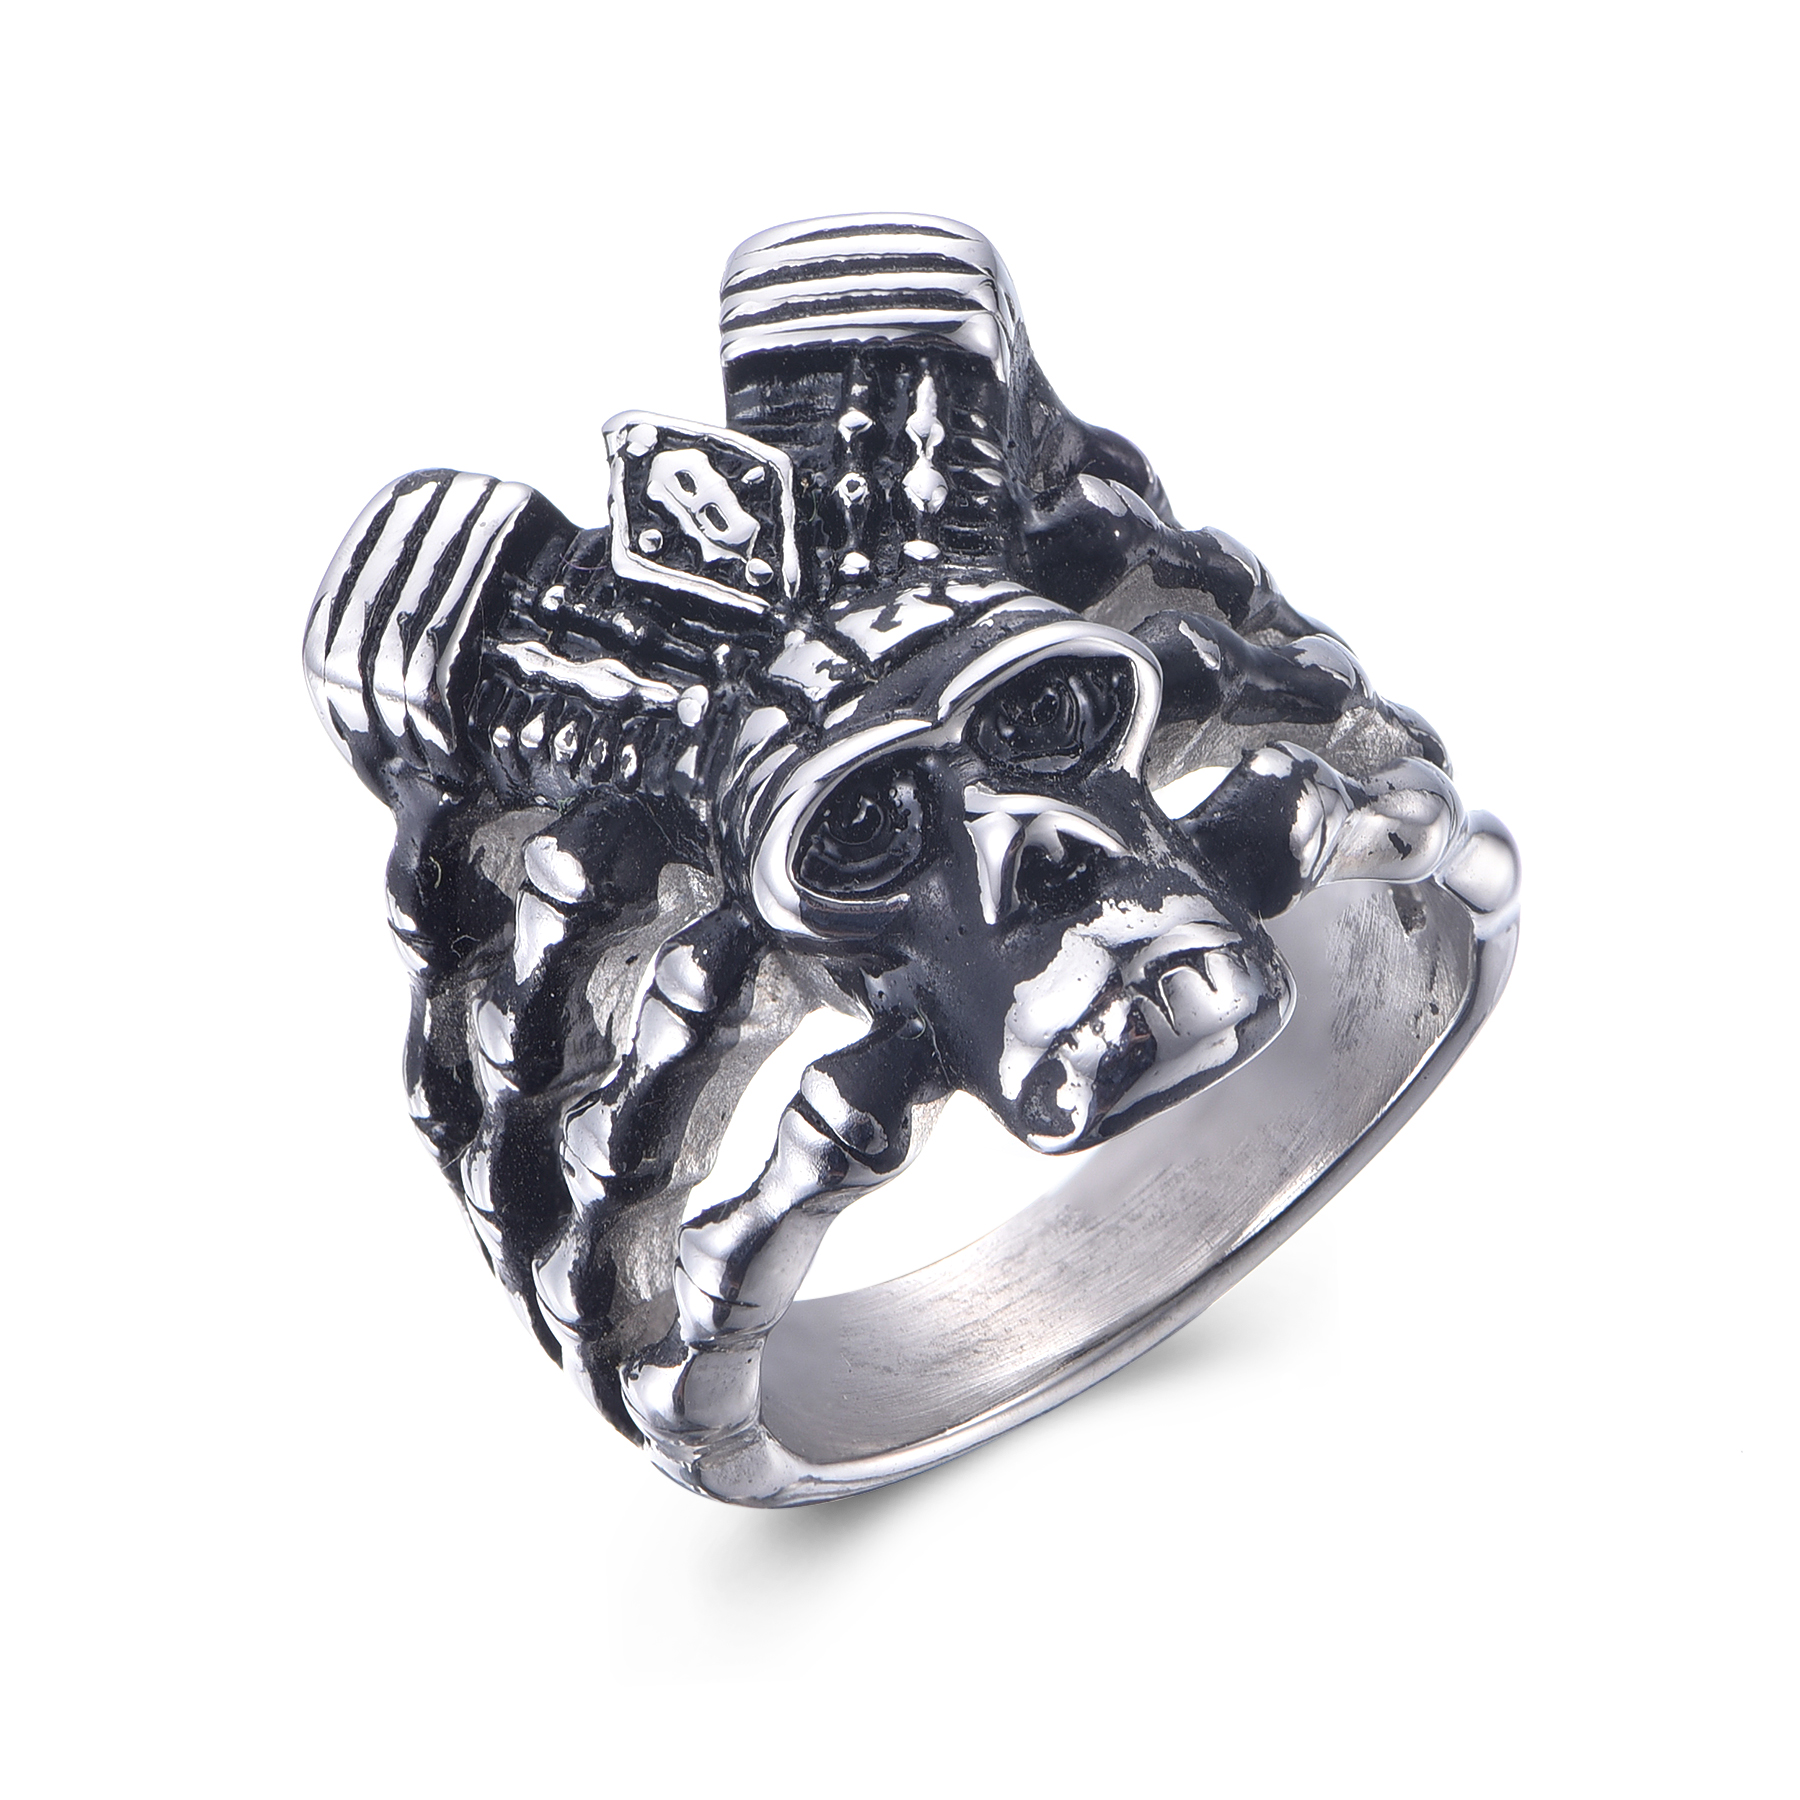 Hip Hop Stainless Steel Vintage Male Skull Ring Wholesale RS10-08